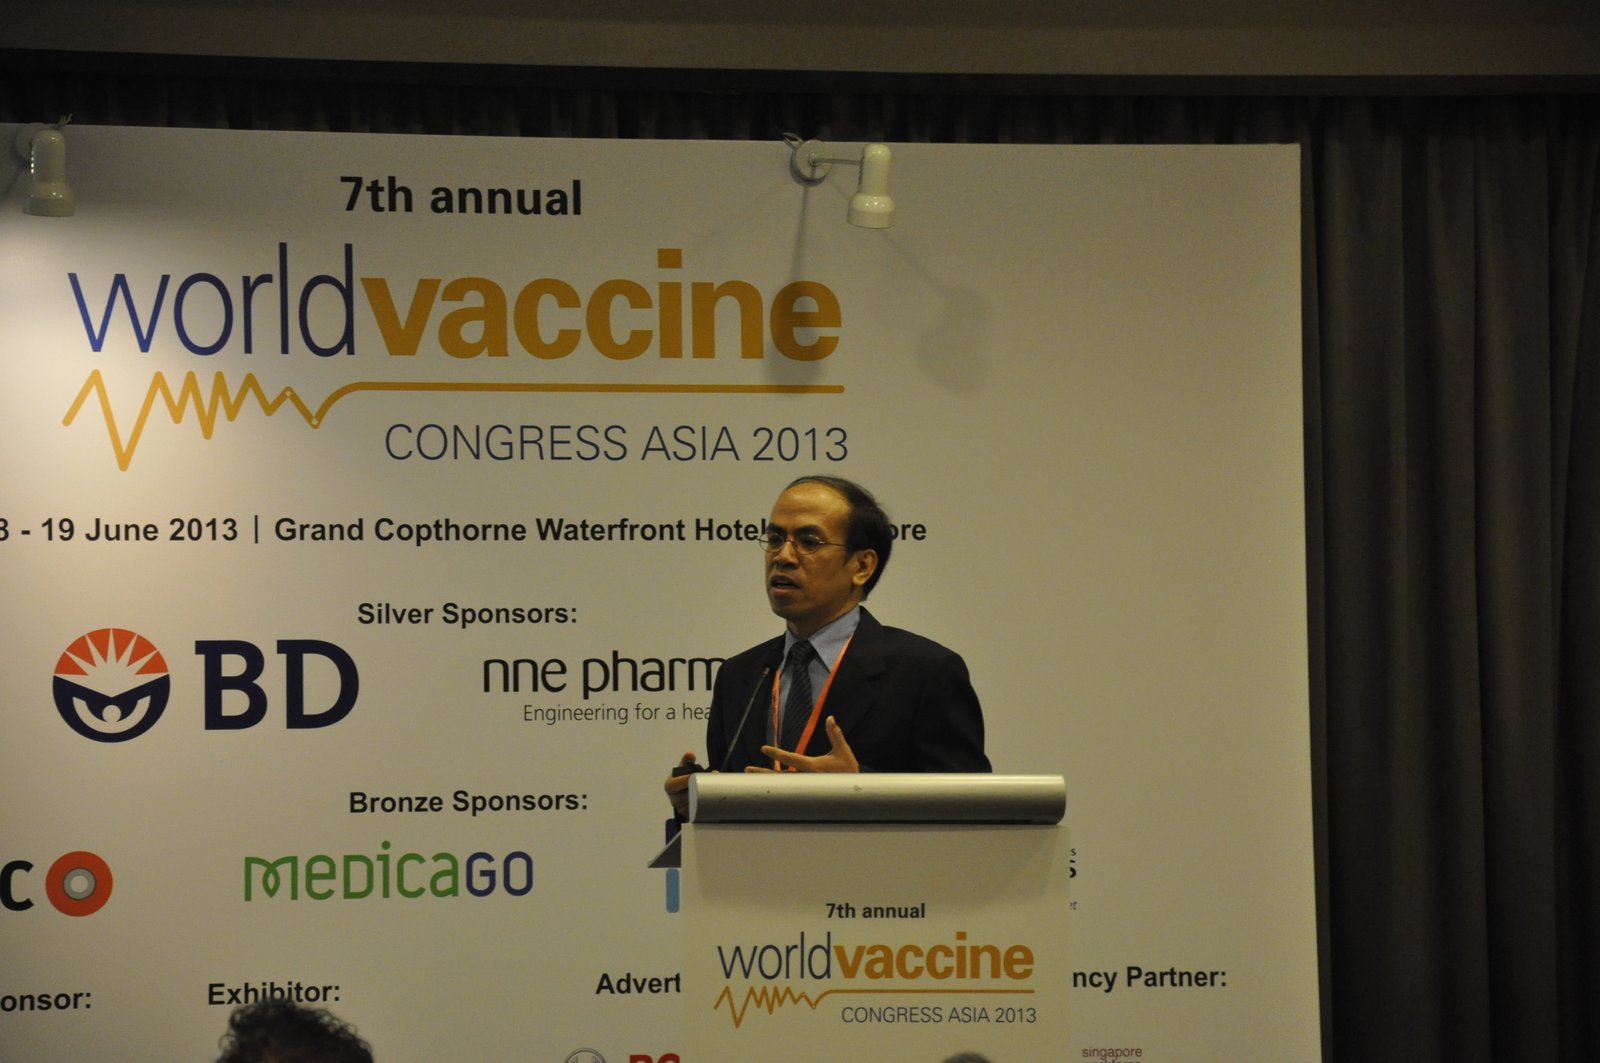 Mr Charung Muengchana, director of National Vaccine Institute, Thailand's Ministry of Public Health, speaking at 7th Annual World Vaccine Congress, held in Singapore